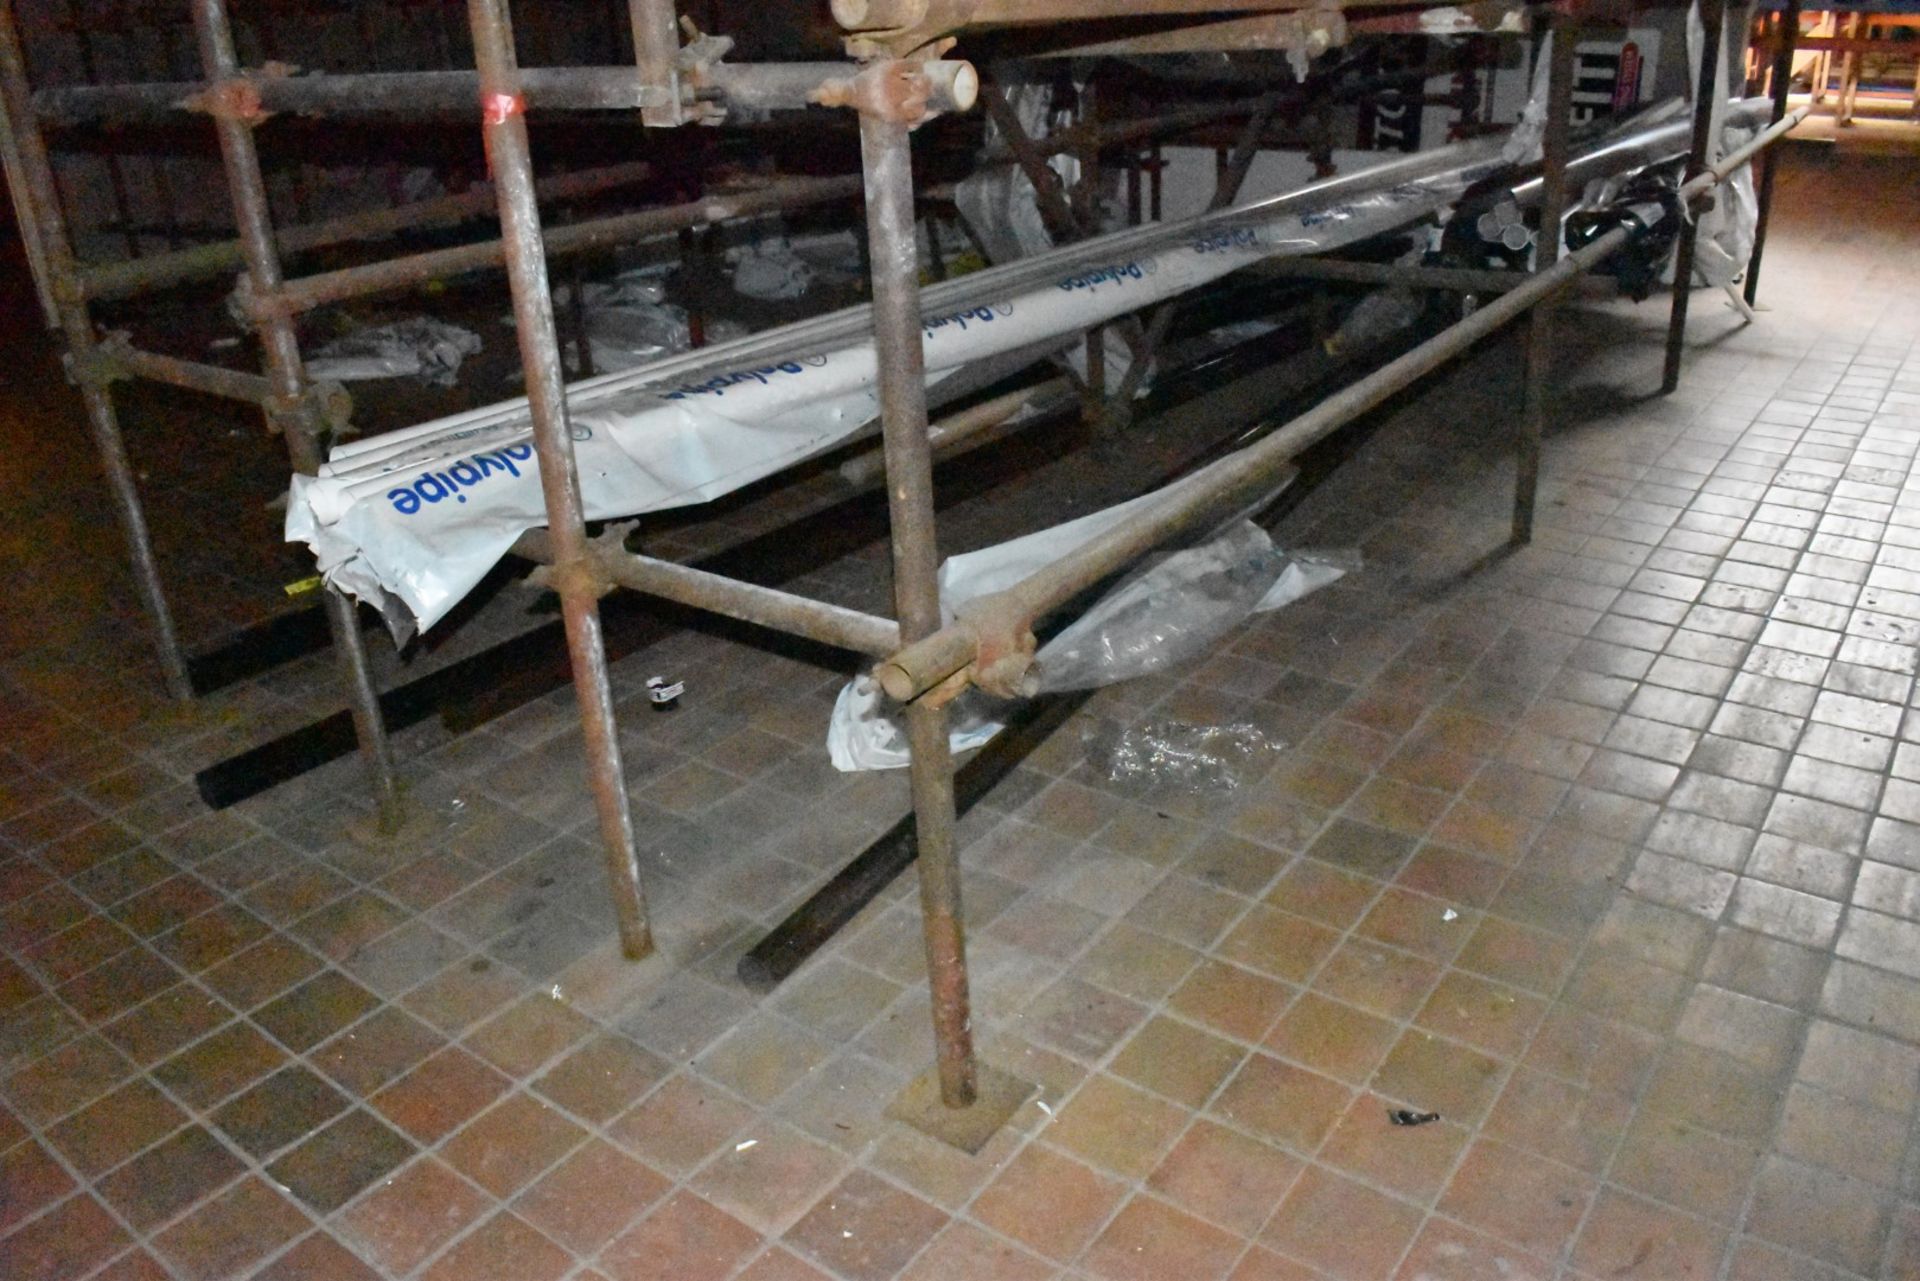 1 x Large Collection of Scaffolding and Fixtures Covering a Floor Space of Approx 13 x 13ft - Image 11 of 15